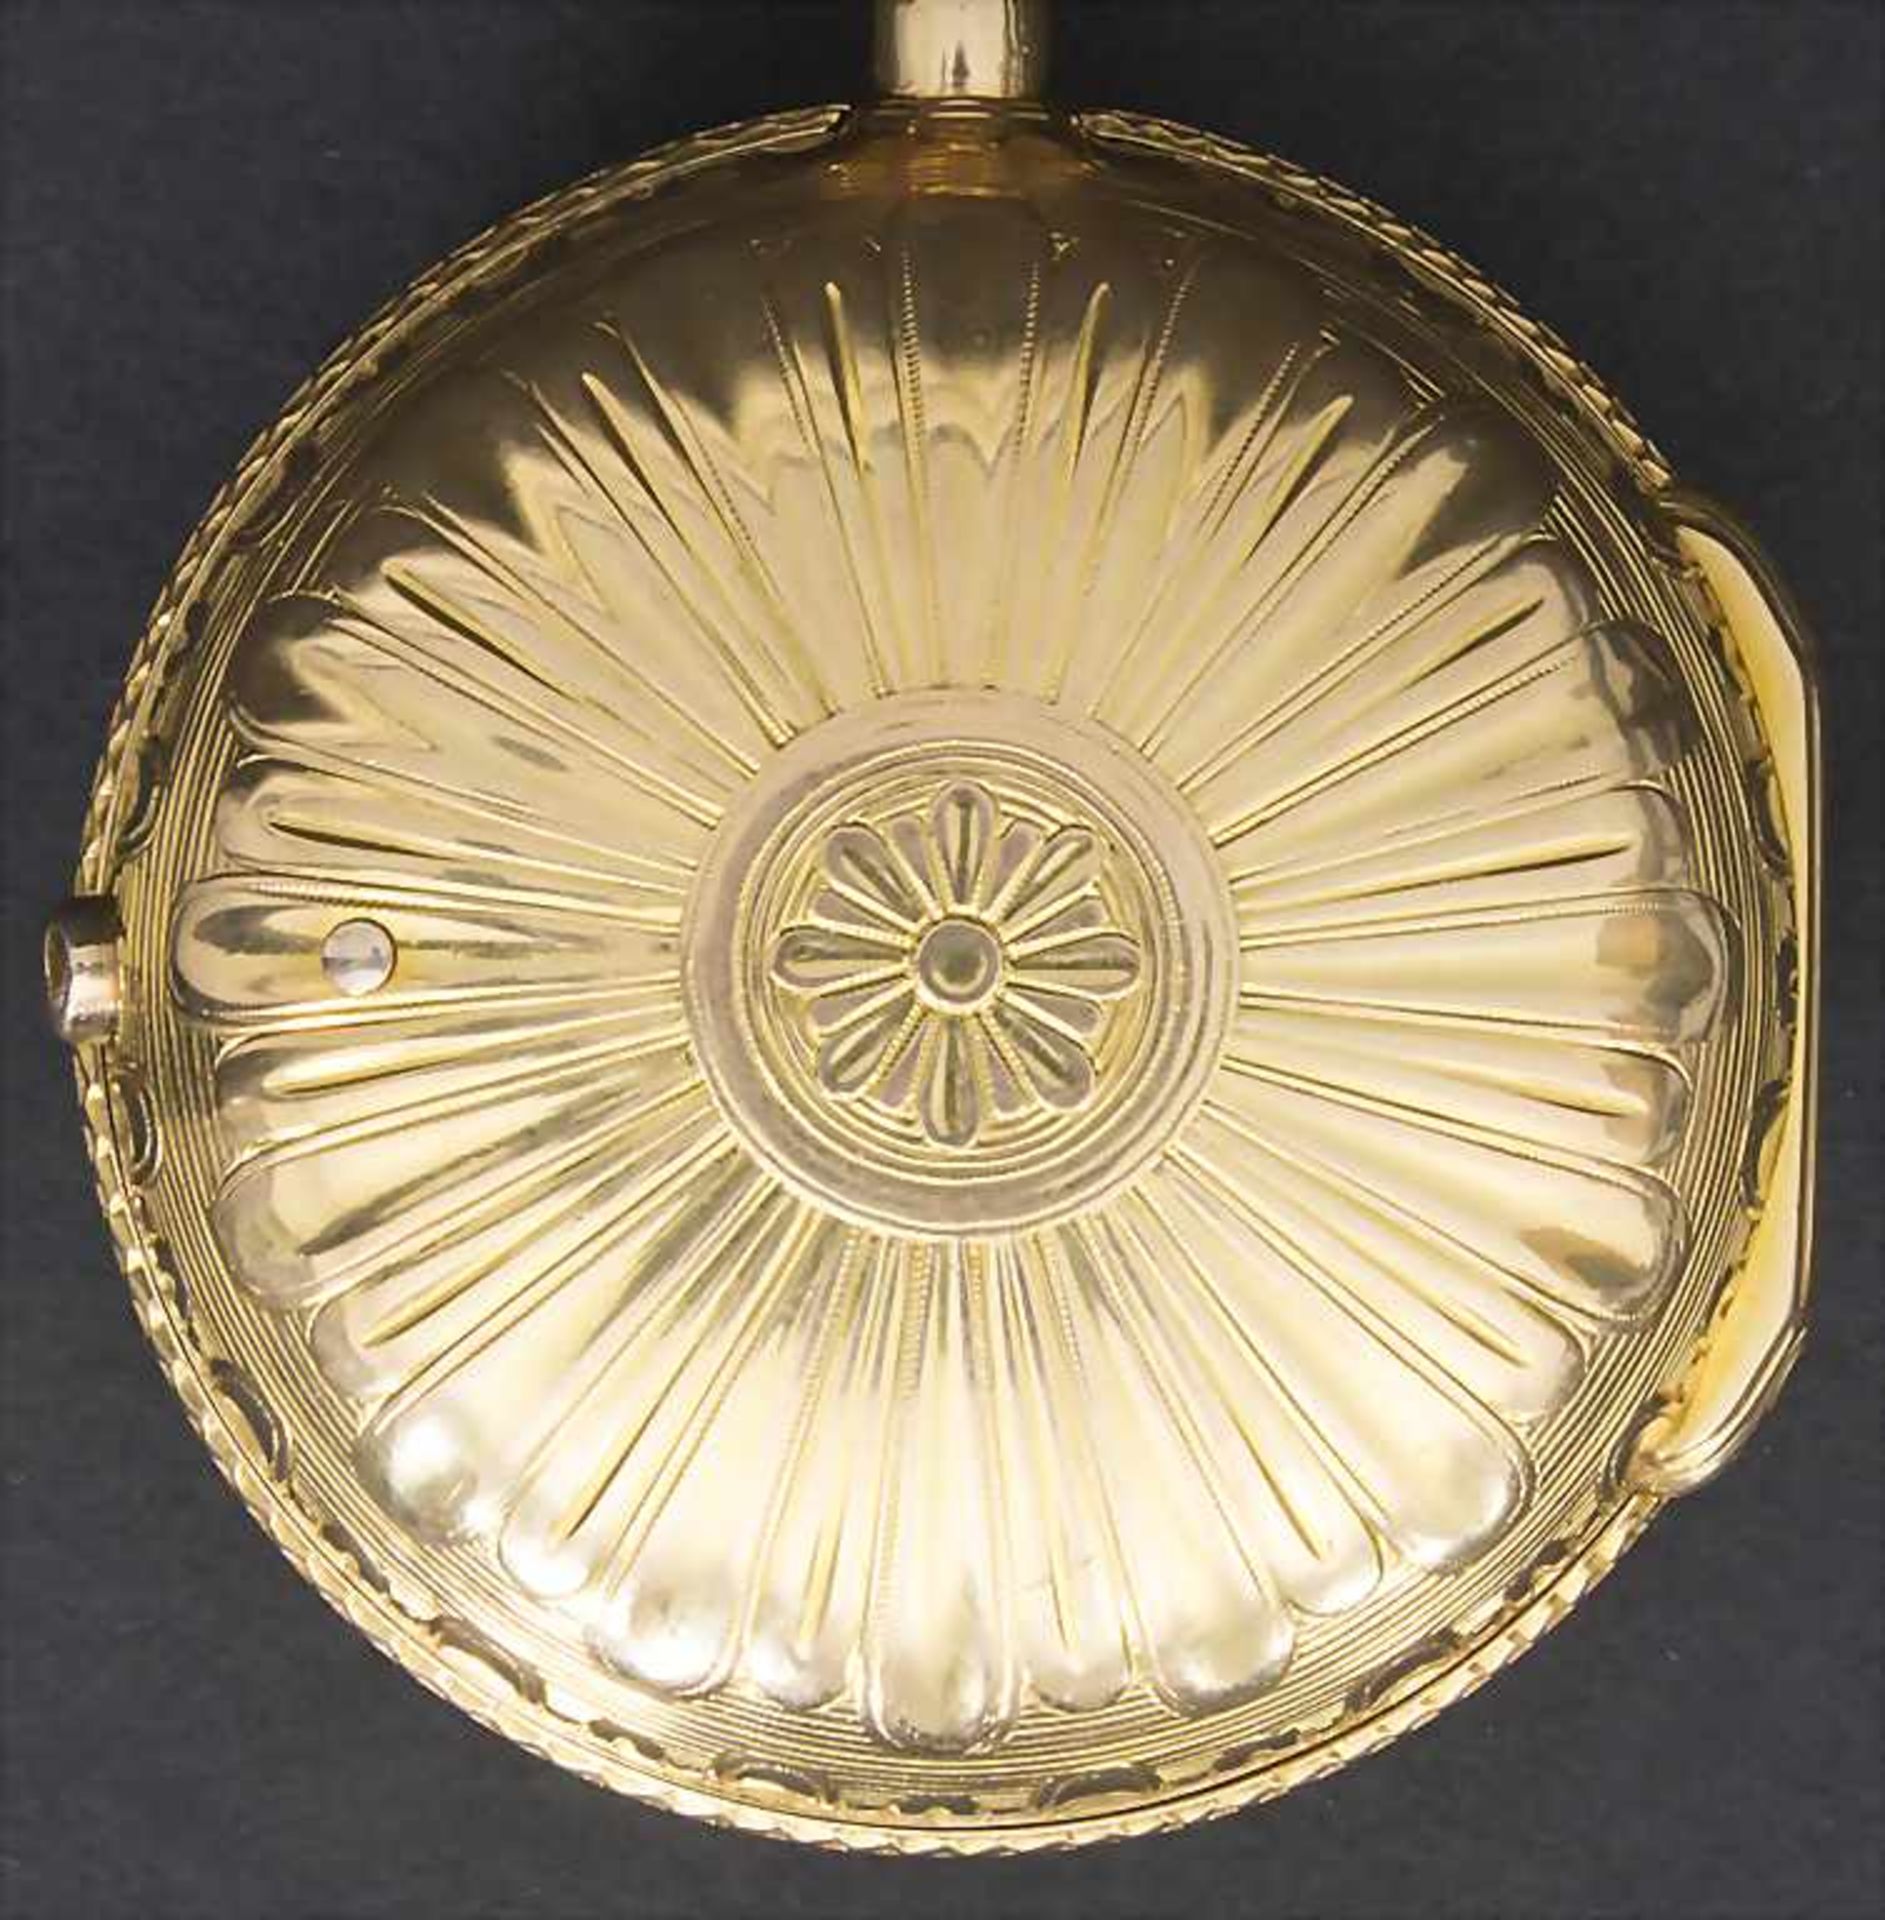 François Jolly, Offene Taschenuhr mit 1/4 Repetition / A pocket watch 1/4 quarter repeater, Paris, - Image 3 of 3